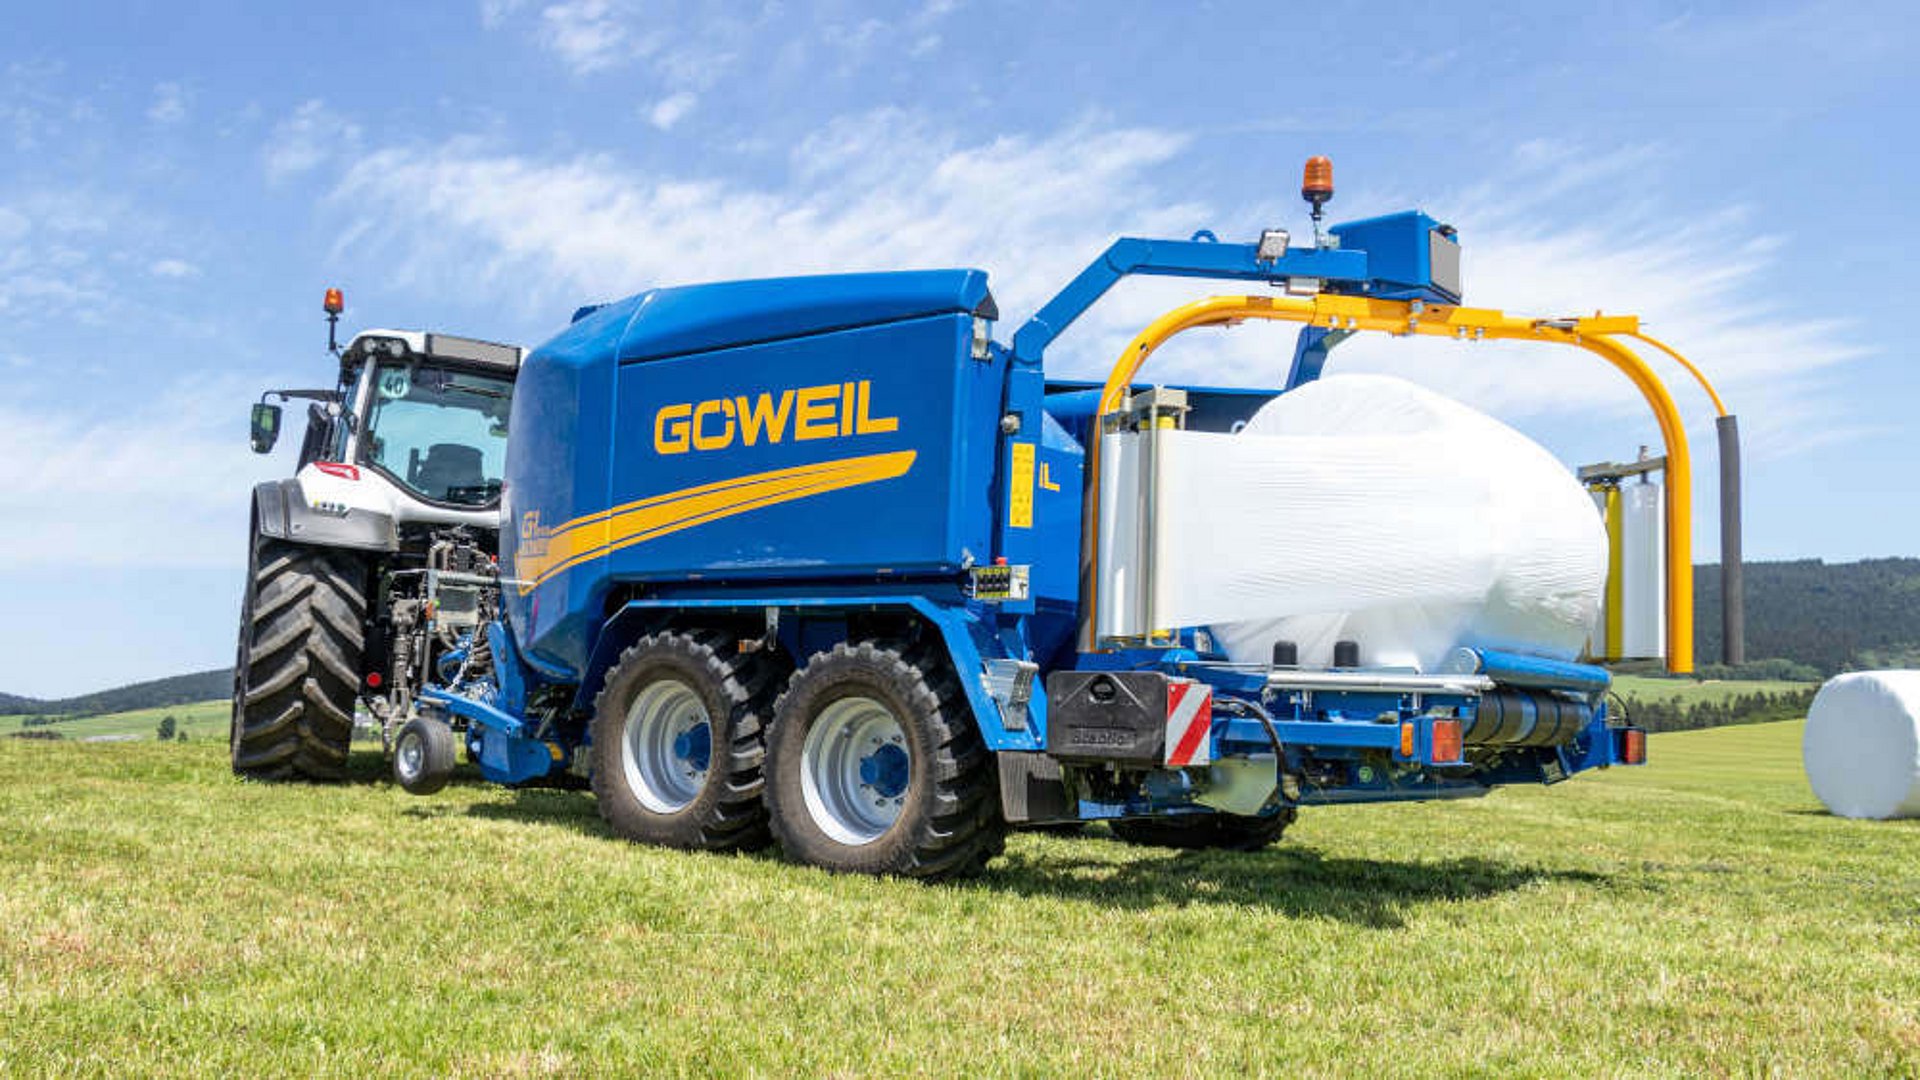 GOWEIL - Going WELL!!! The new Goweil G1 F125 5050 Kombi baler/wrapper  hasn't been in New Zealand very long, but already it's making a huge  impression., By Webbline Agriculture Ltd